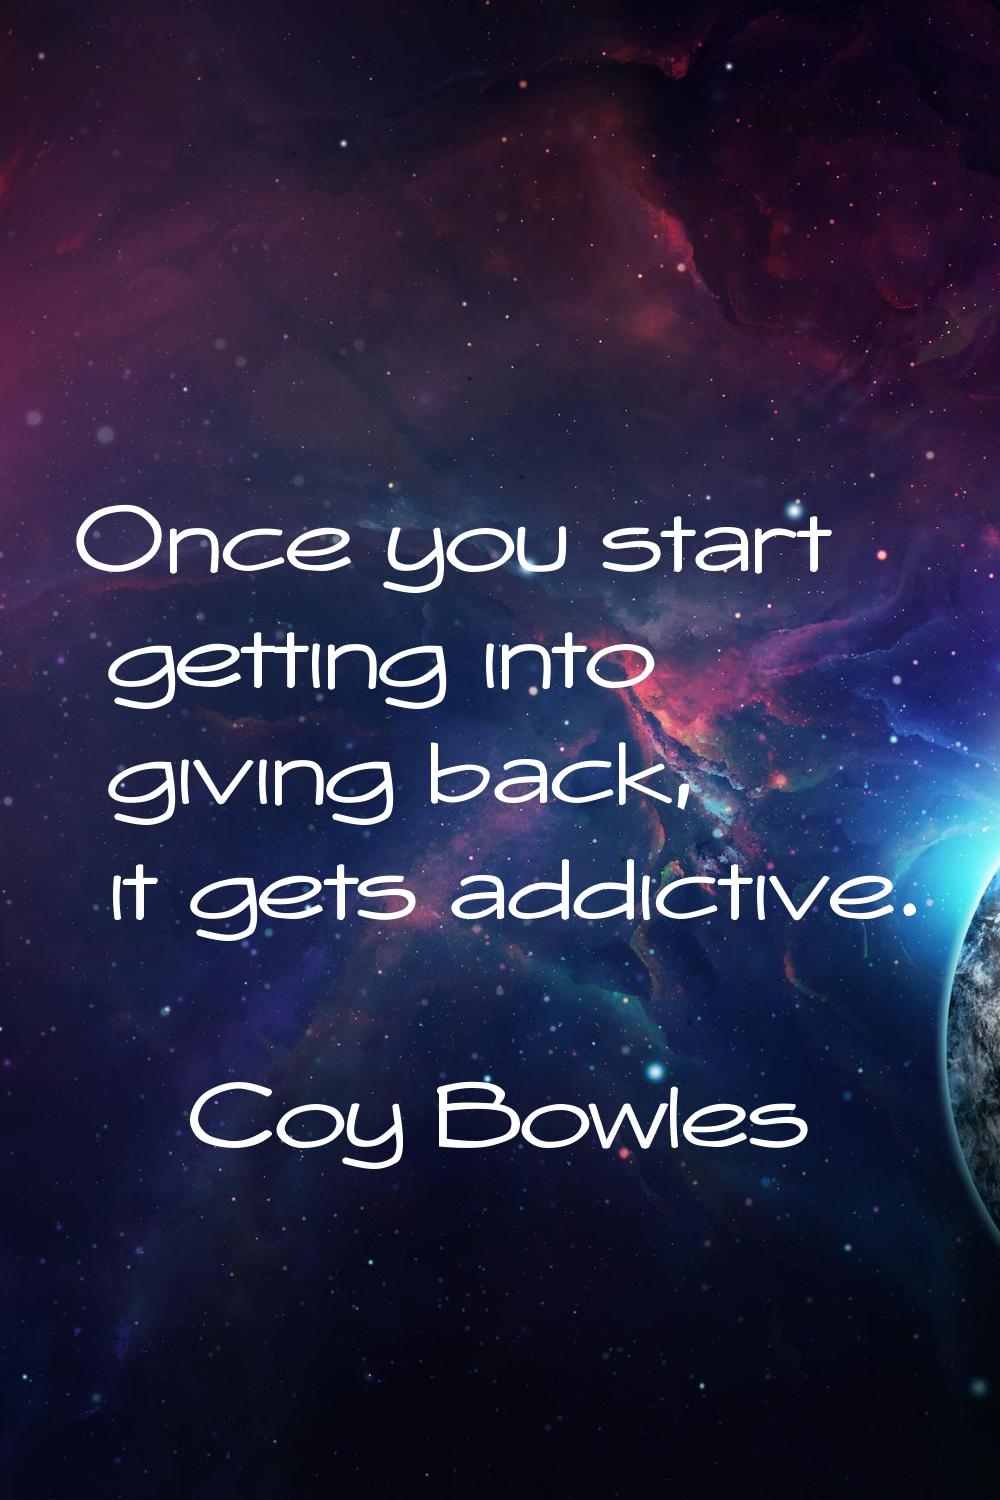 Once you start getting into giving back, it gets addictive.